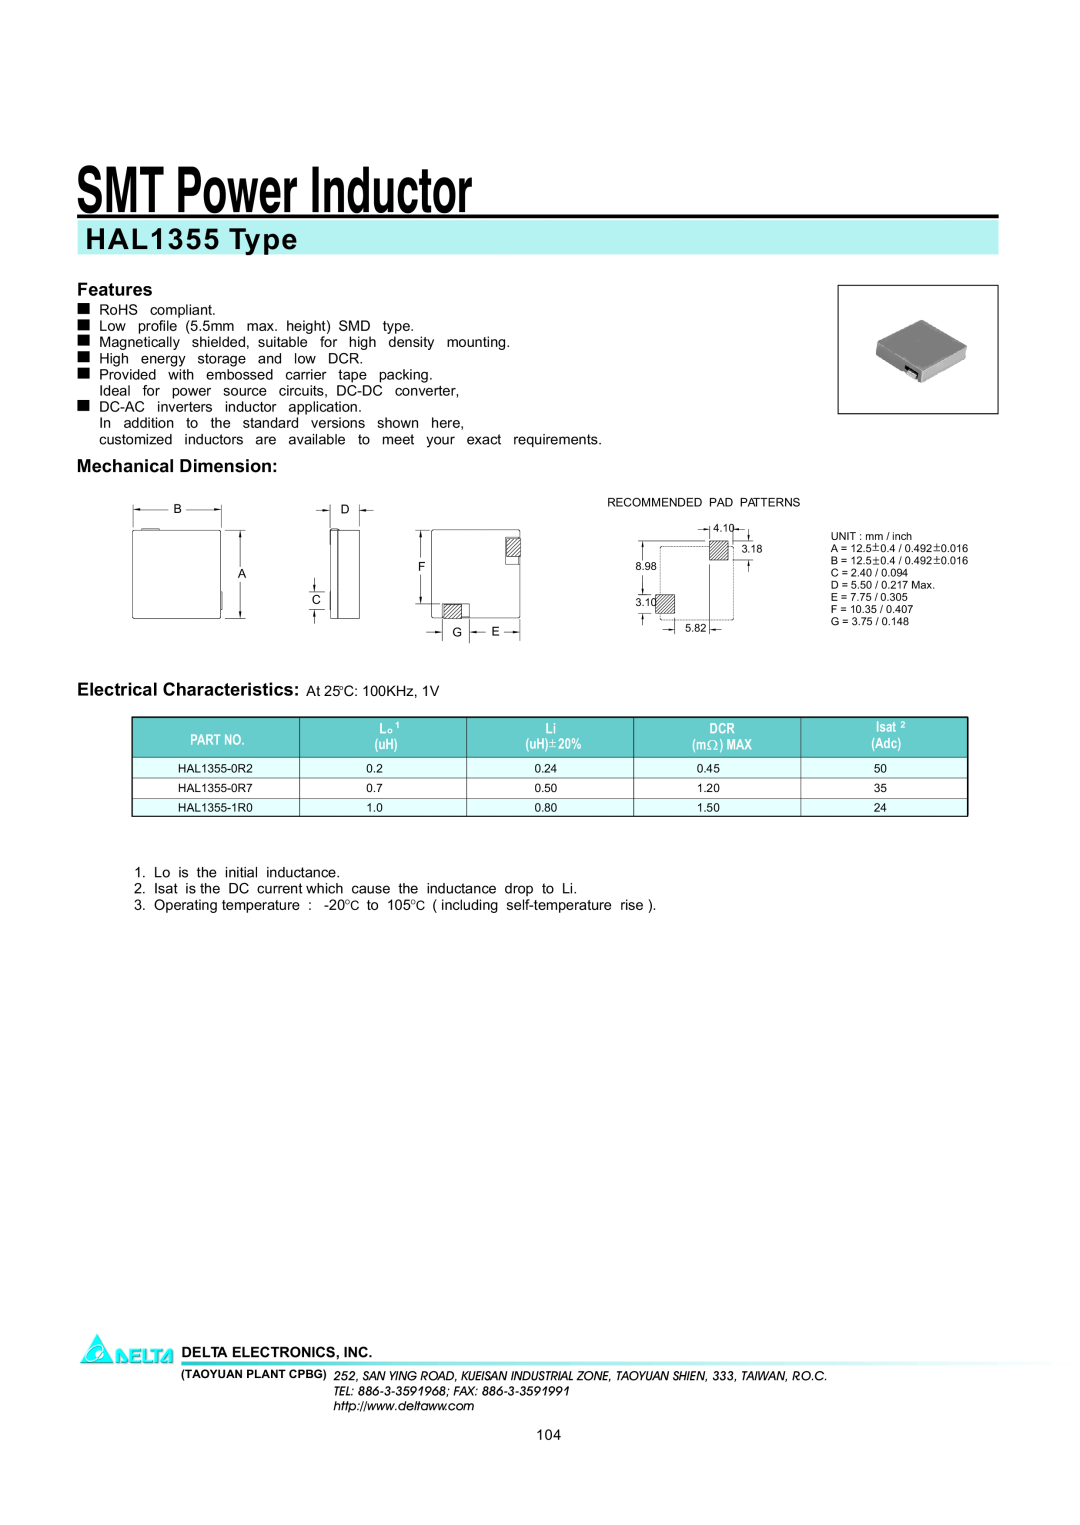 Delta Electronics manual SMT Power Inductor, HAL1355 Type, Features, Mechanical Dimension, Isat, uH 20%, m MAX 